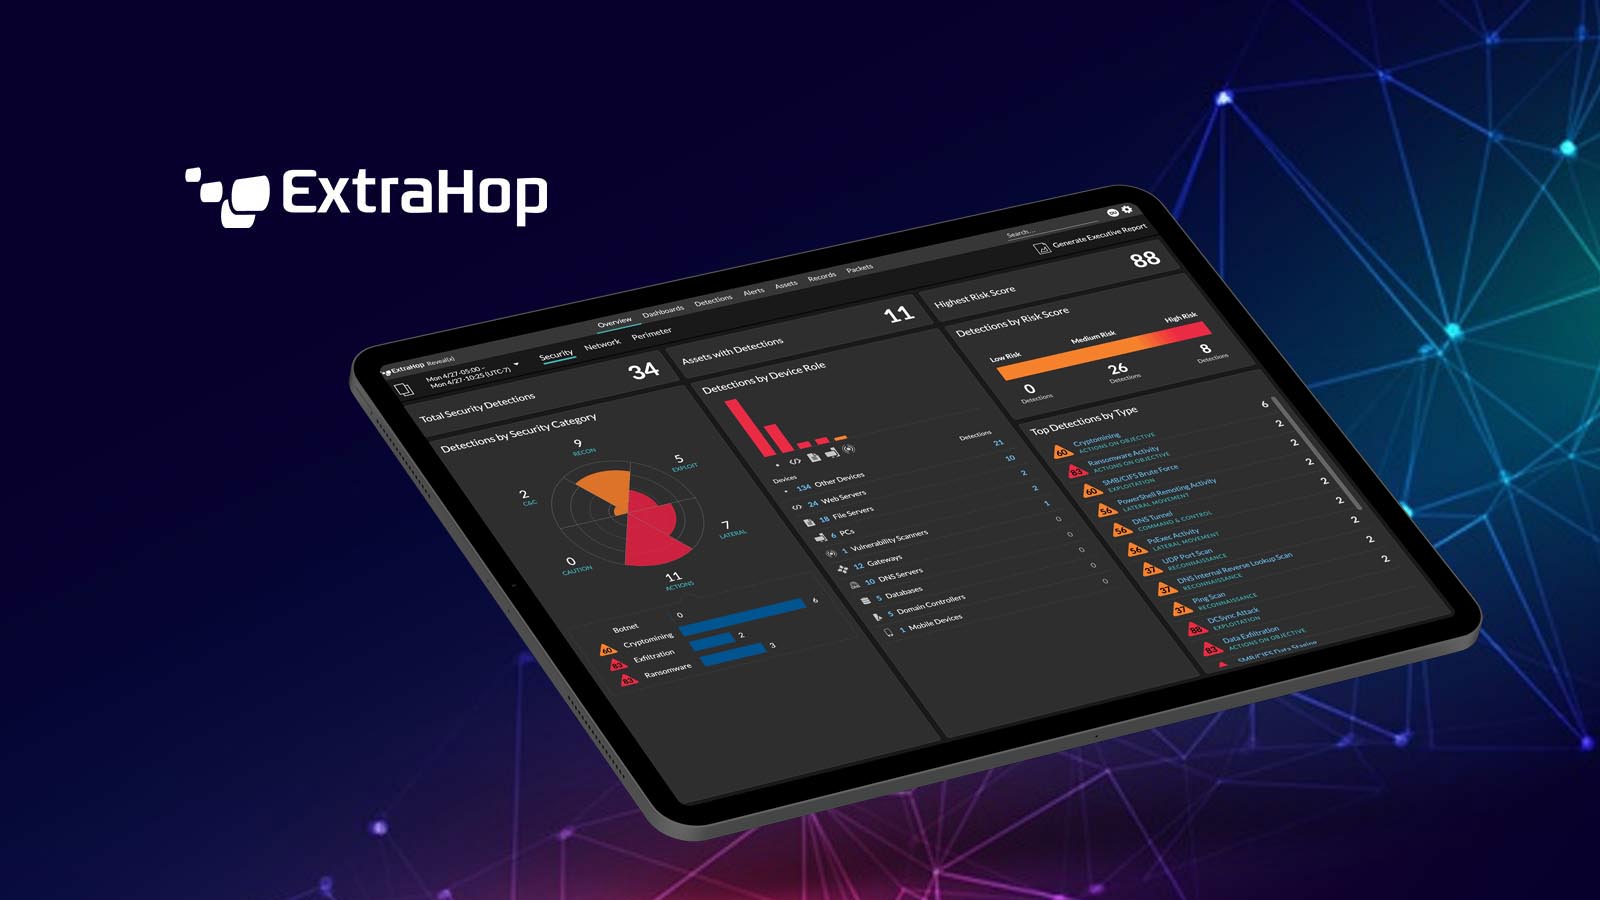 ExtraHop Accelerates Security Operations with High Fidelity Network Intelligence Through New Integration with Splunk SOAR